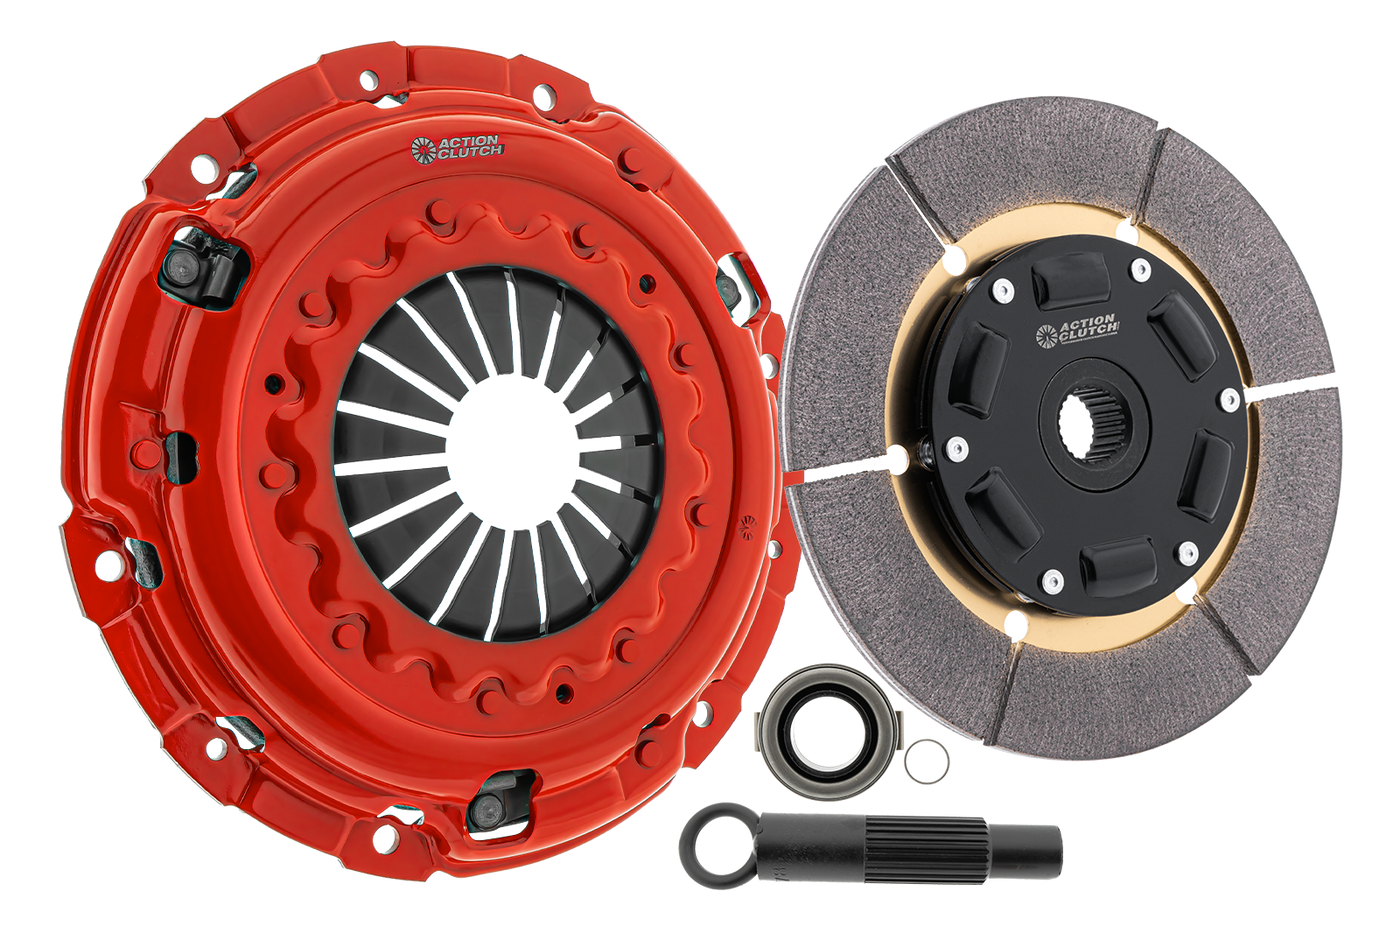 Ironman Sprung (Street) Clutch Kit for Infiniti G37 2008-2013 3.7L (VQ37VHR) Includes Heavy Duty Concentric Slave Bearing